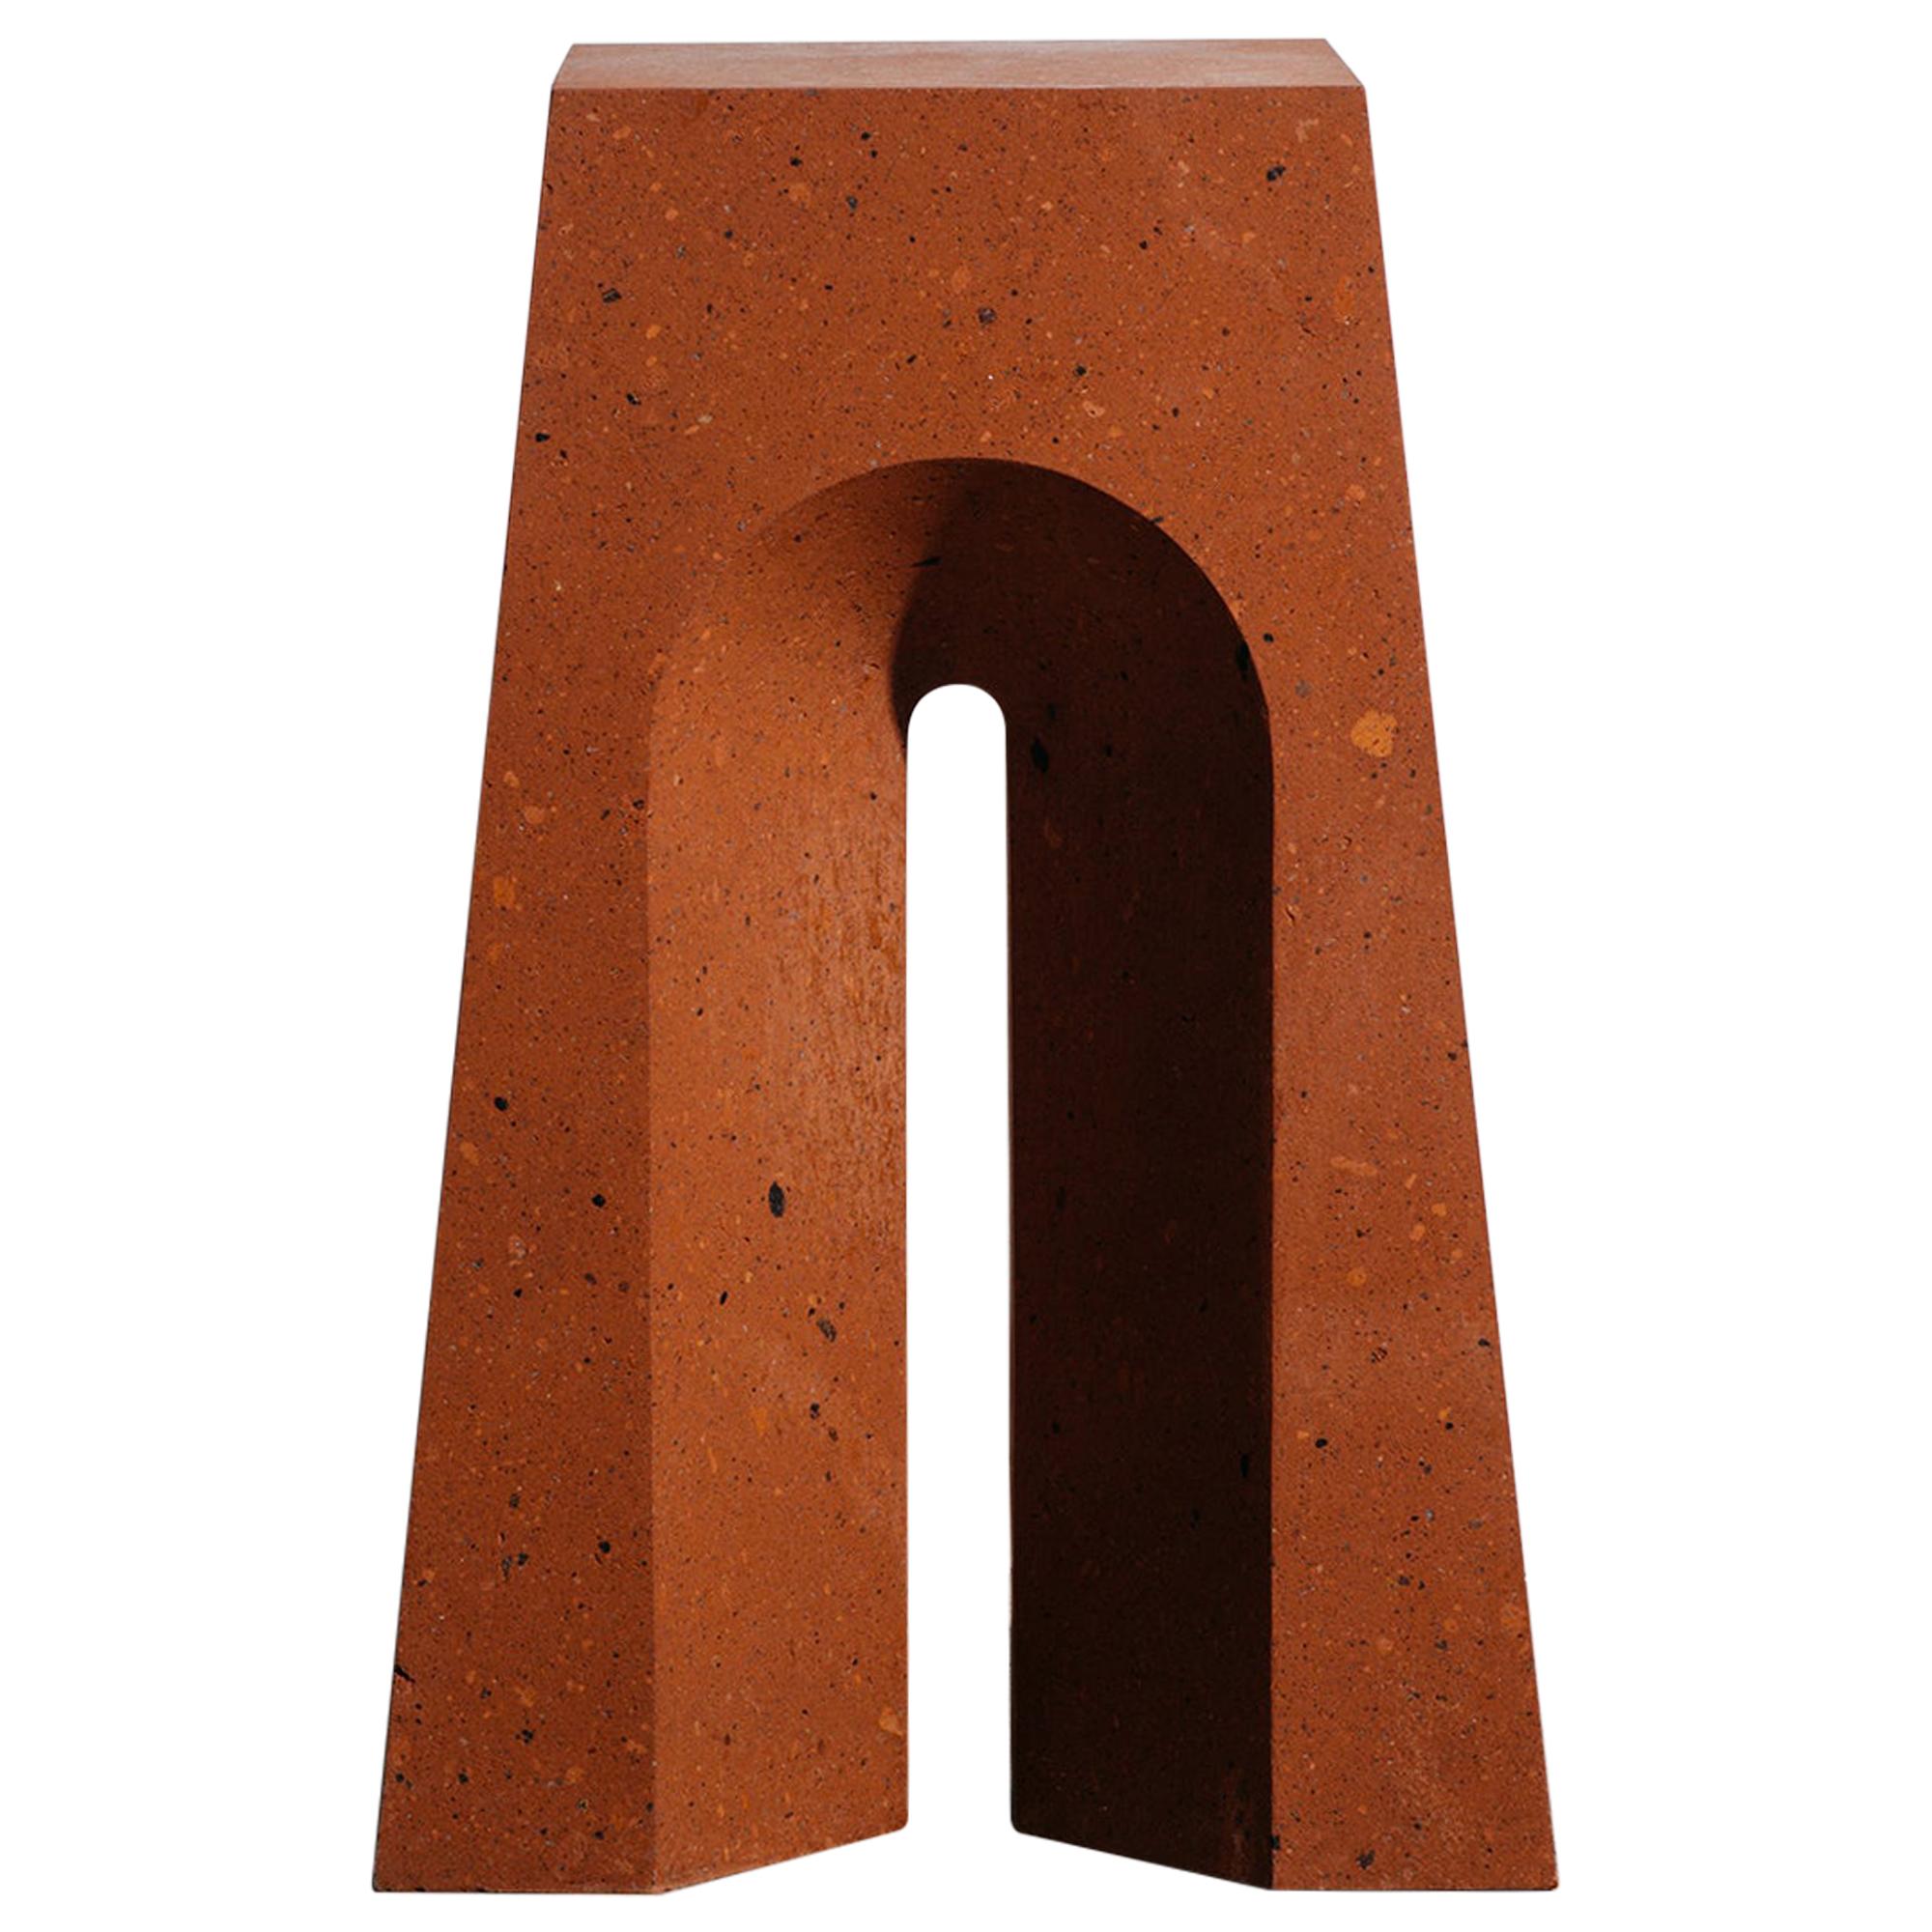 Geometric Arch Side Table in Red Tuff